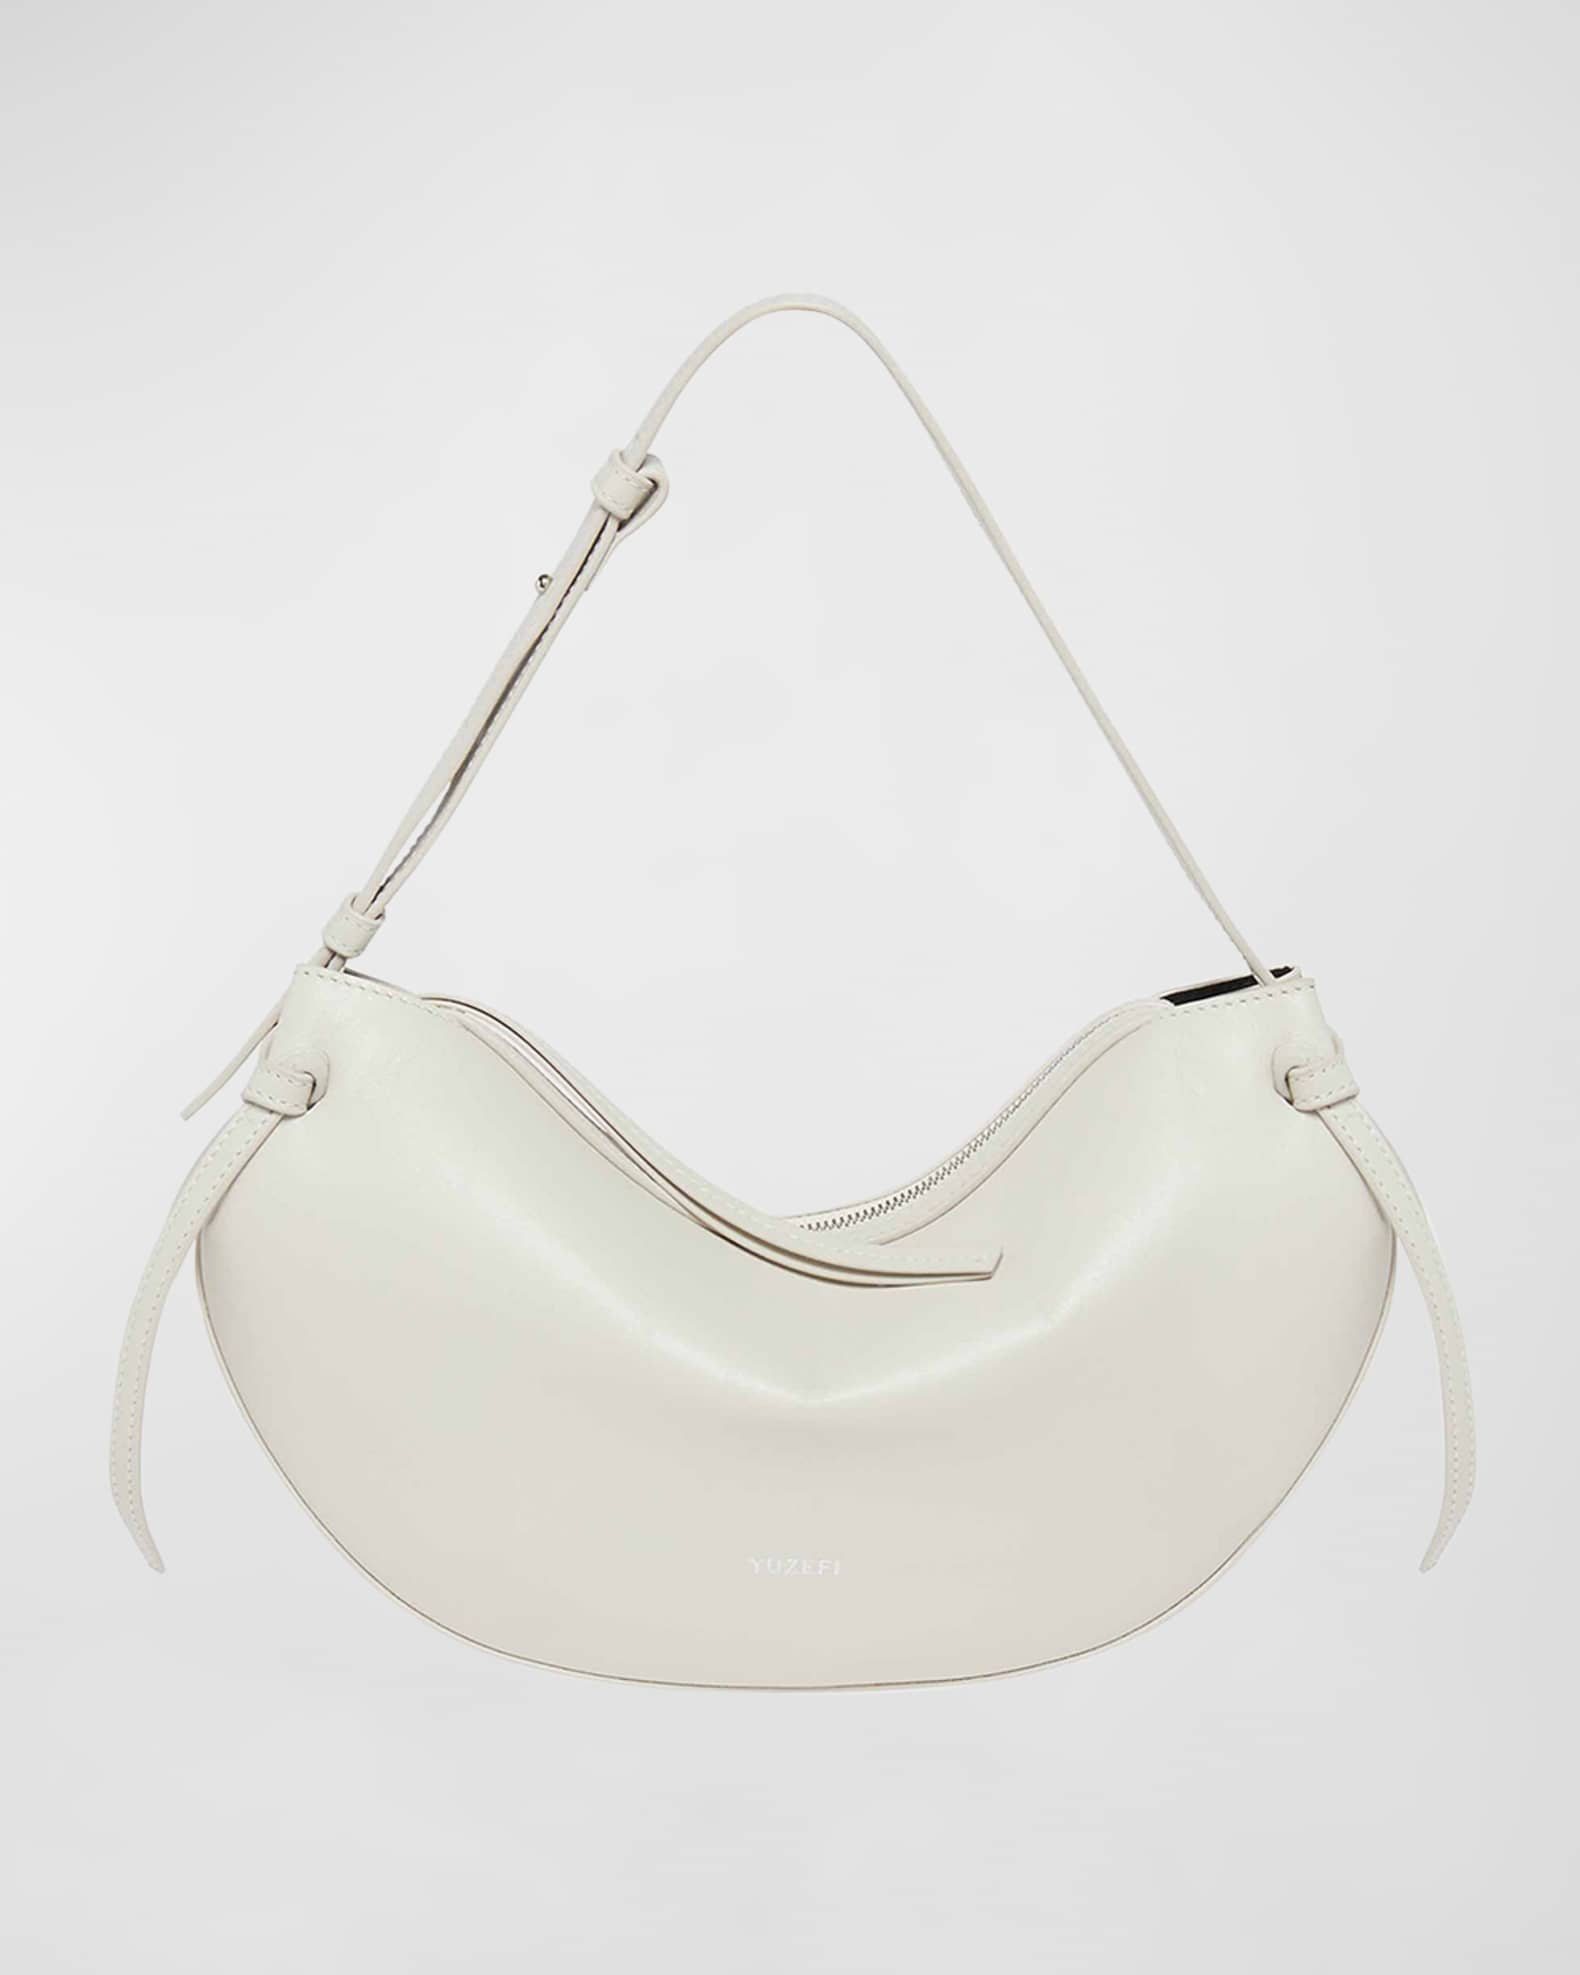 Yuzefi Fortune Cookie Leather Shoulder Bag | Neiman Marcus